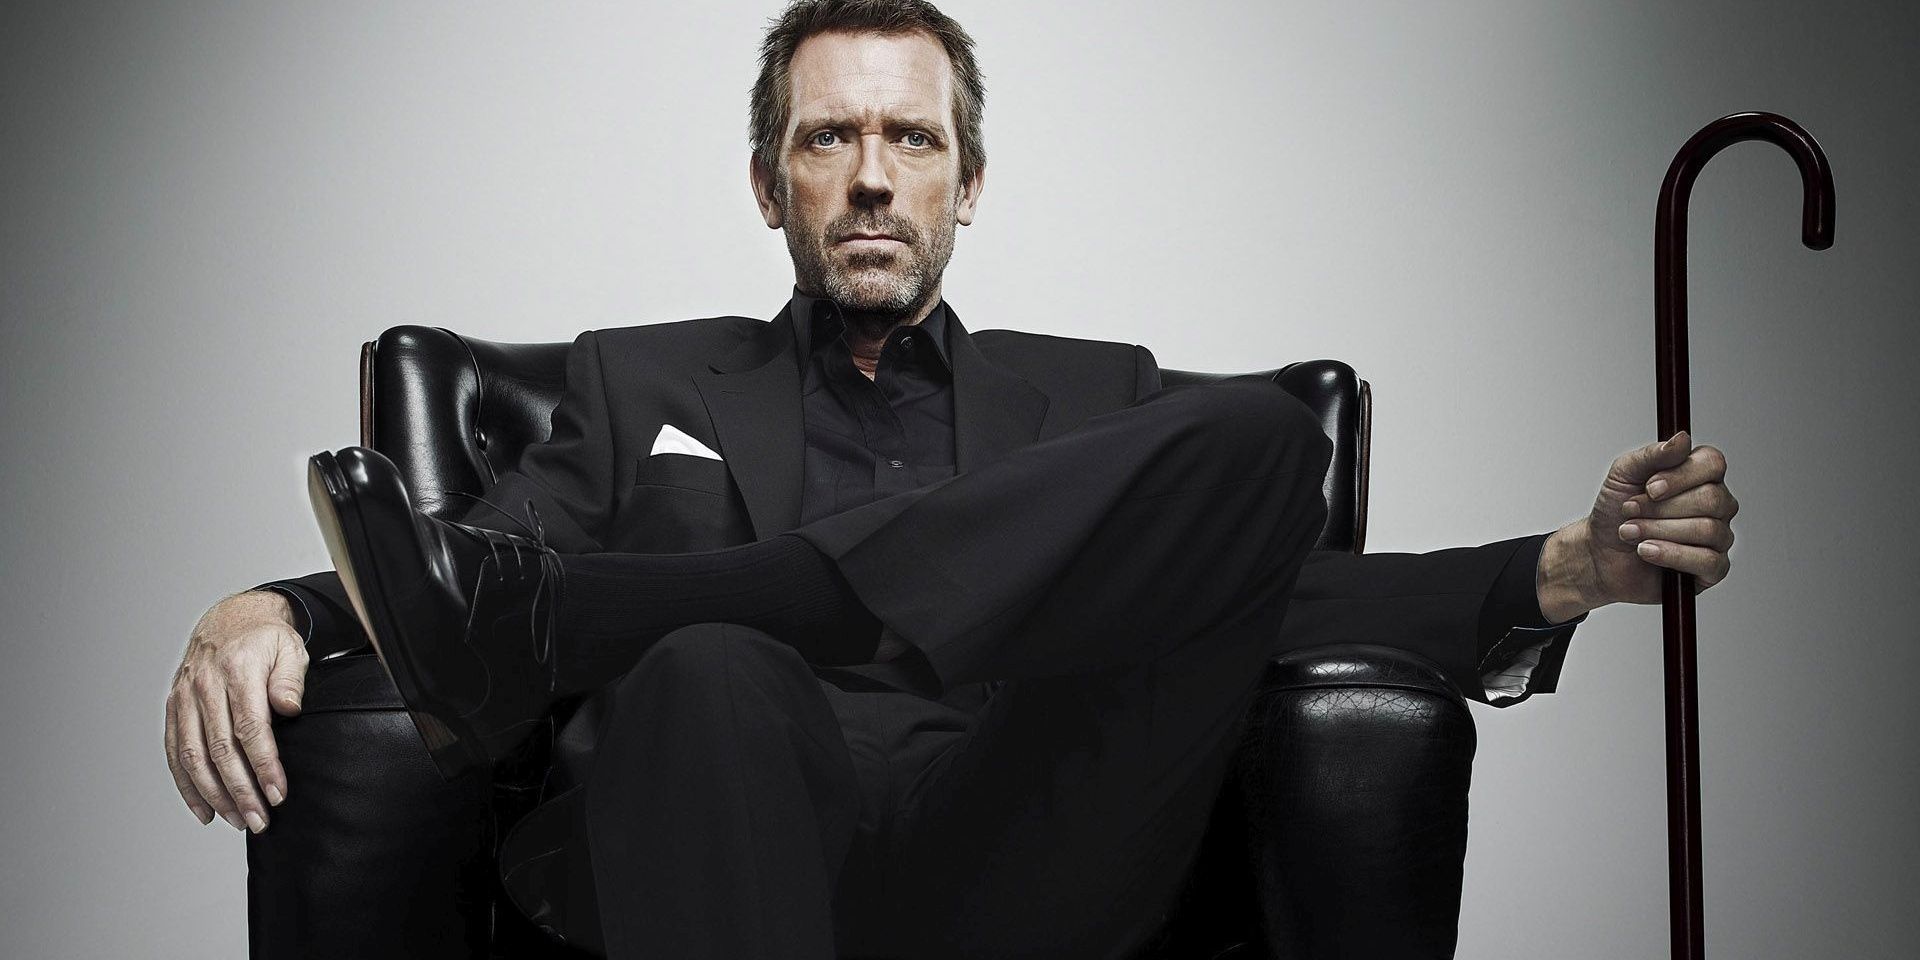 Why House Went To Jail In Season 8 & How He Got Out